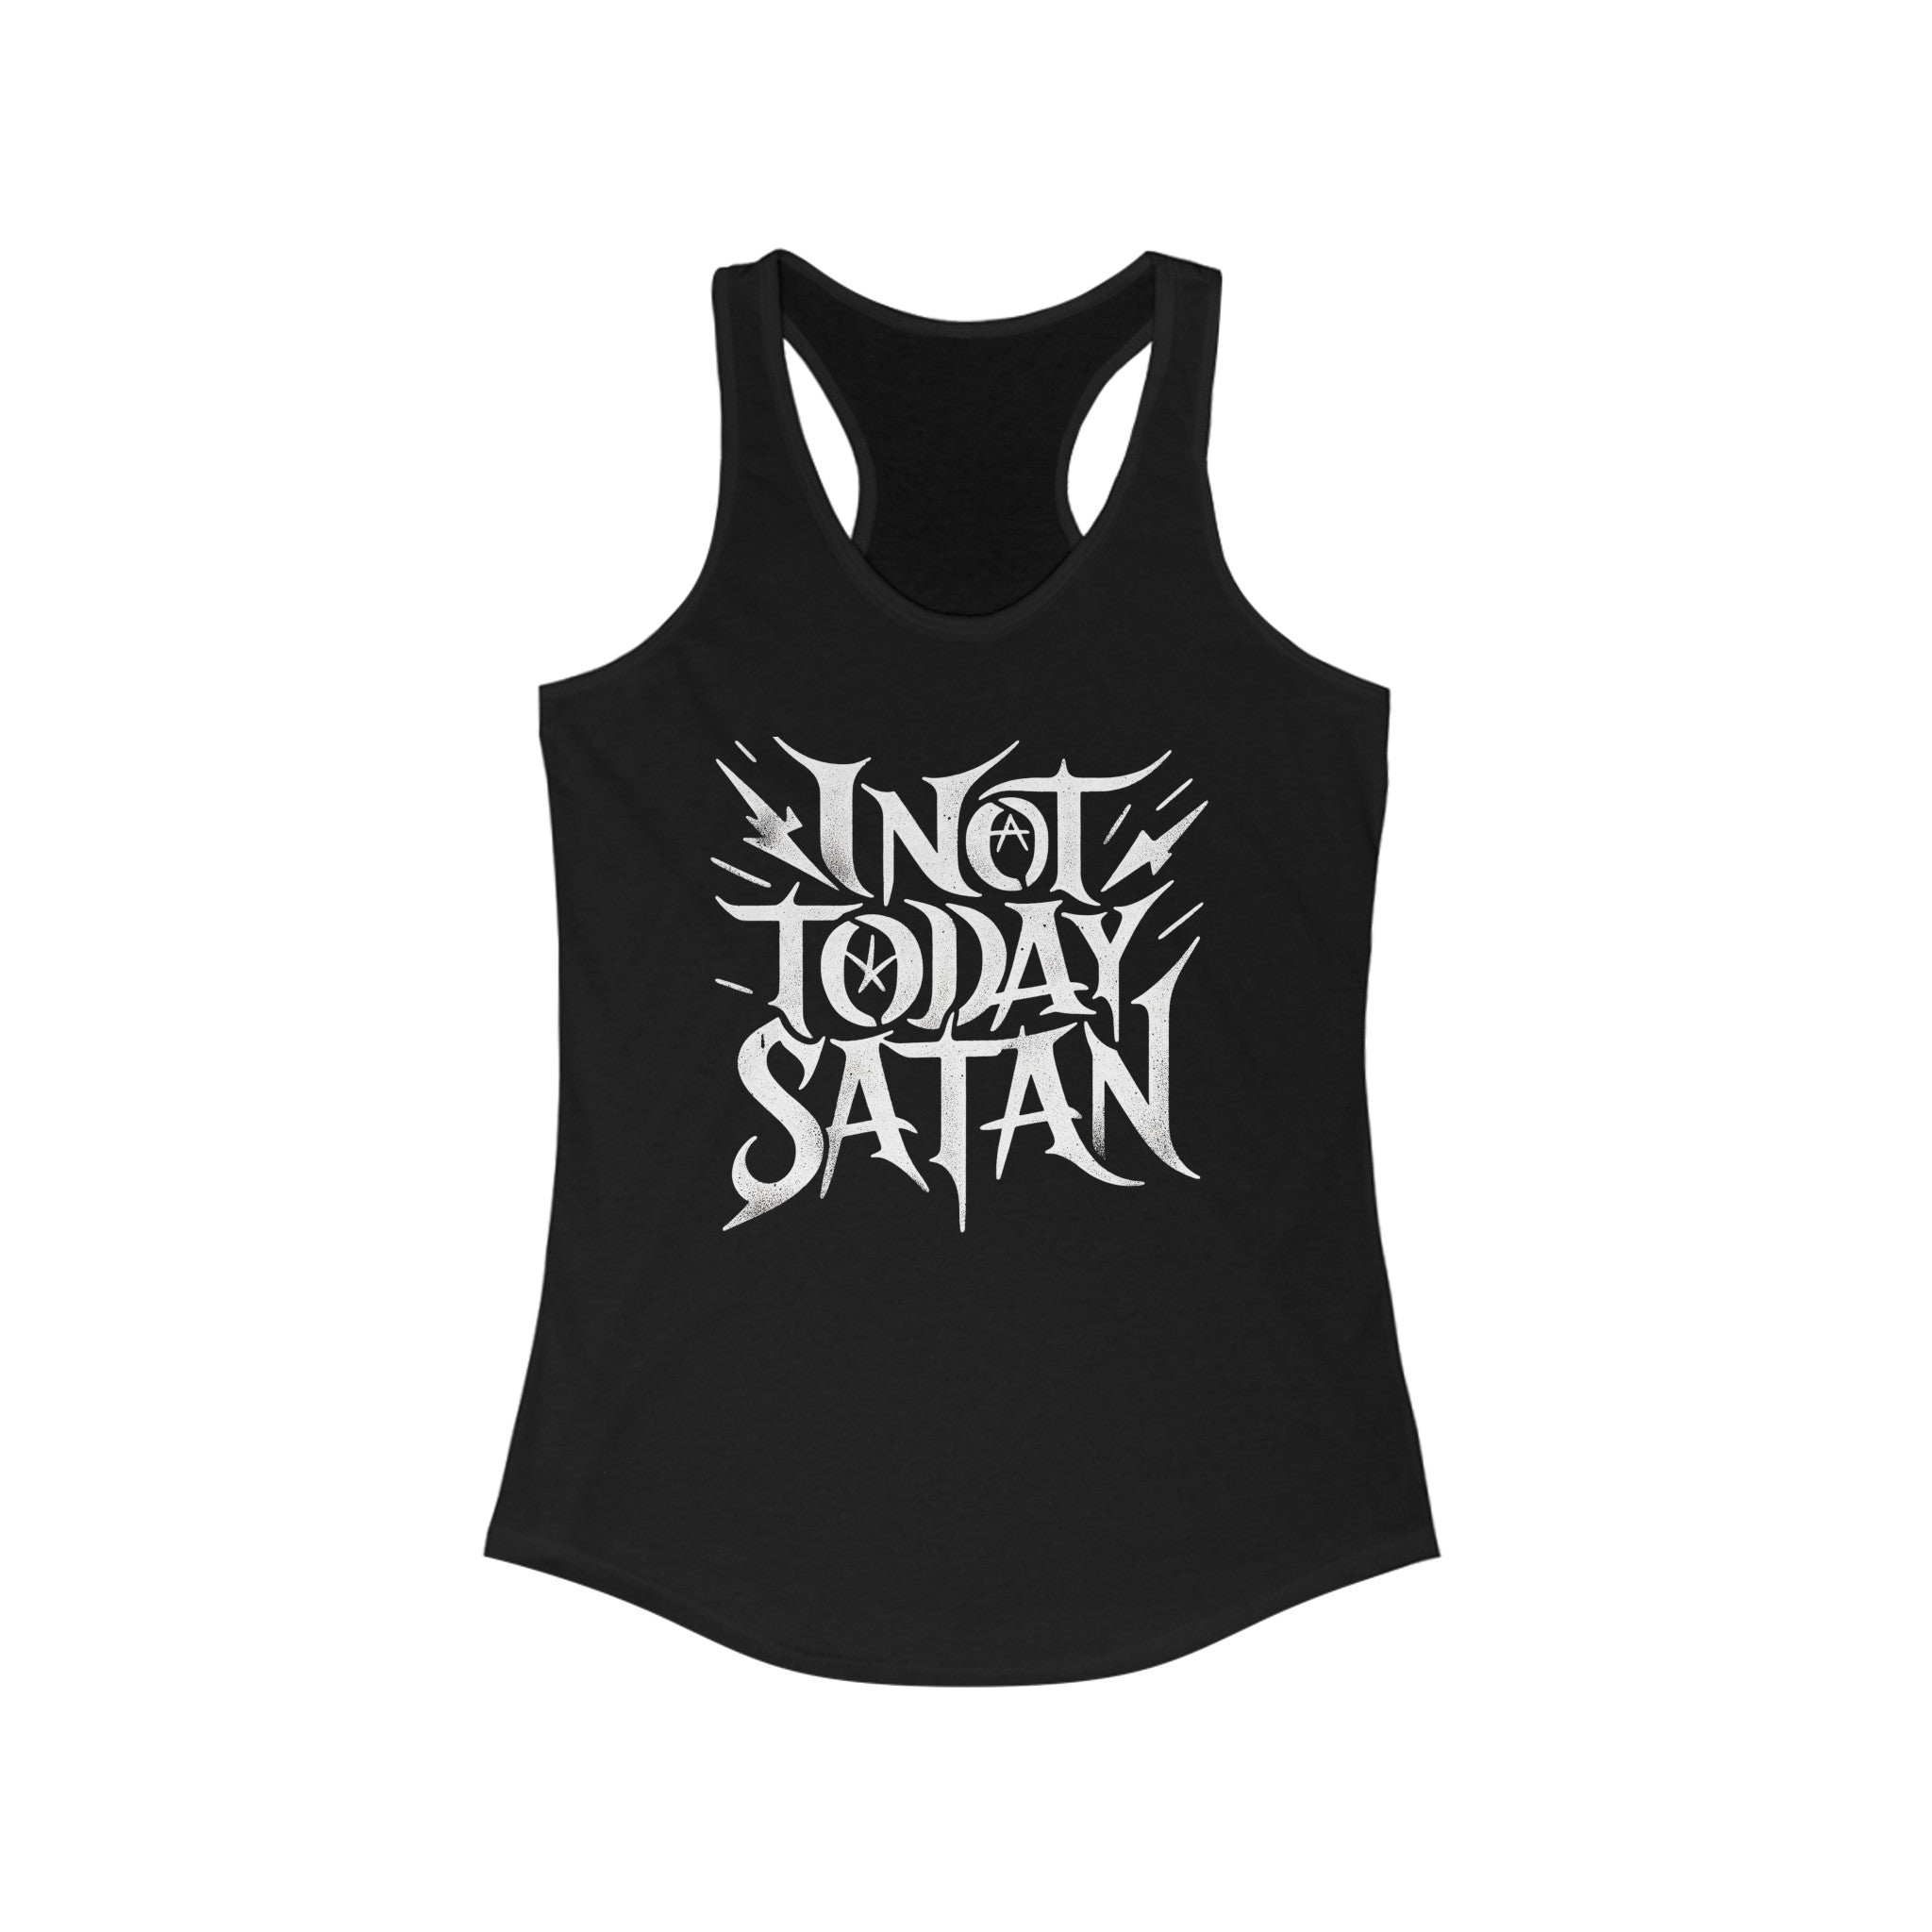 A lightweight Not Today Satan - Women's Racerback Tank featuring the bold, stylized white text "Not Today Satan.